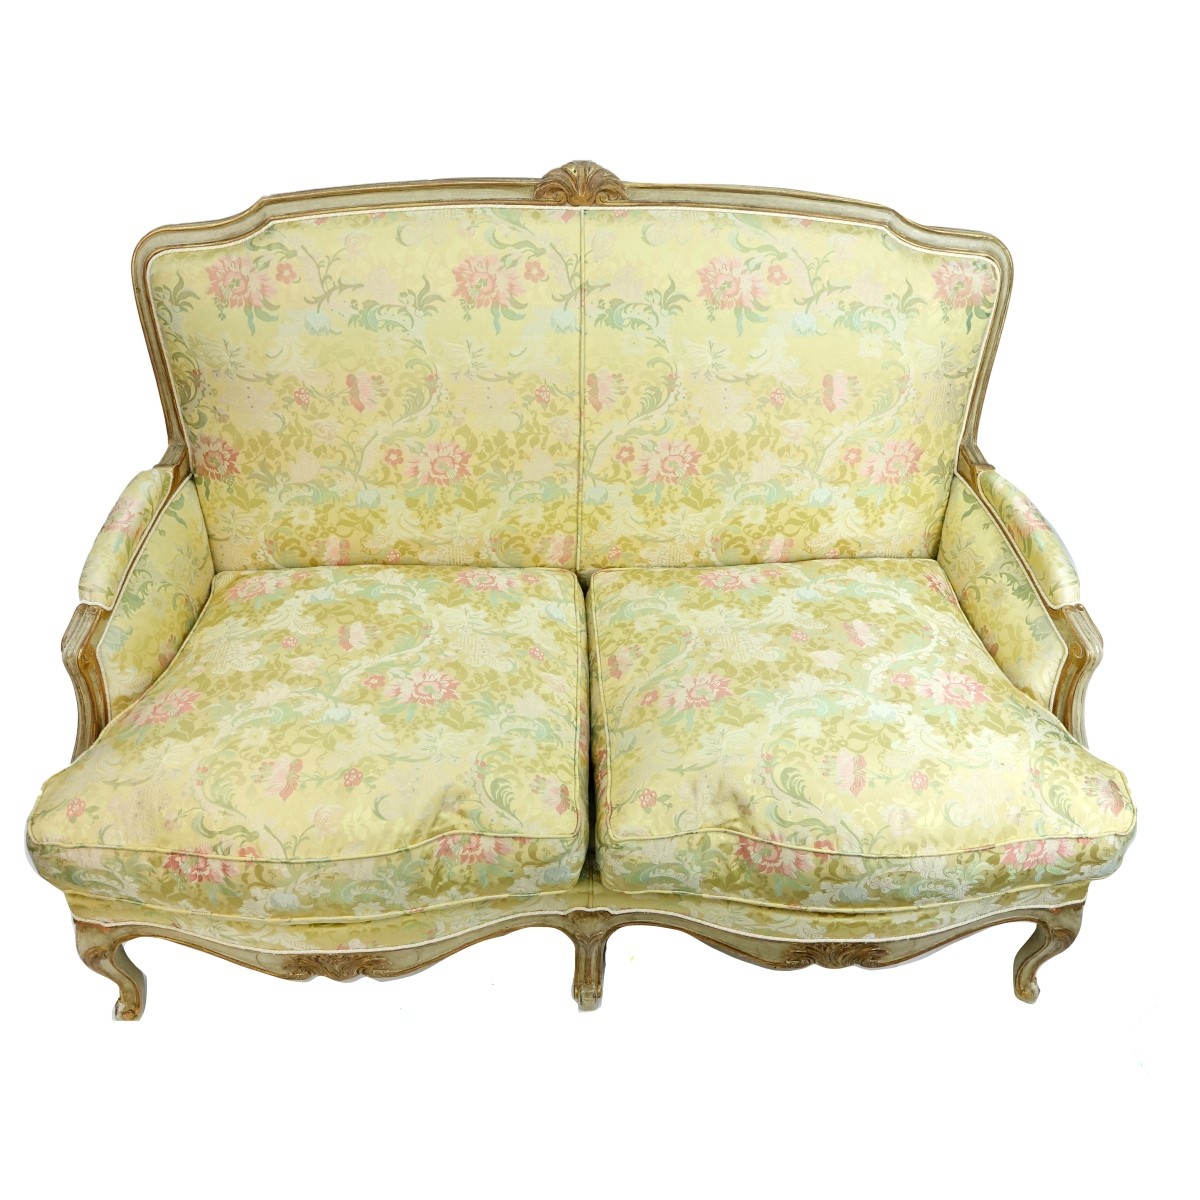 Louis XV Style Gilt Carved Sette